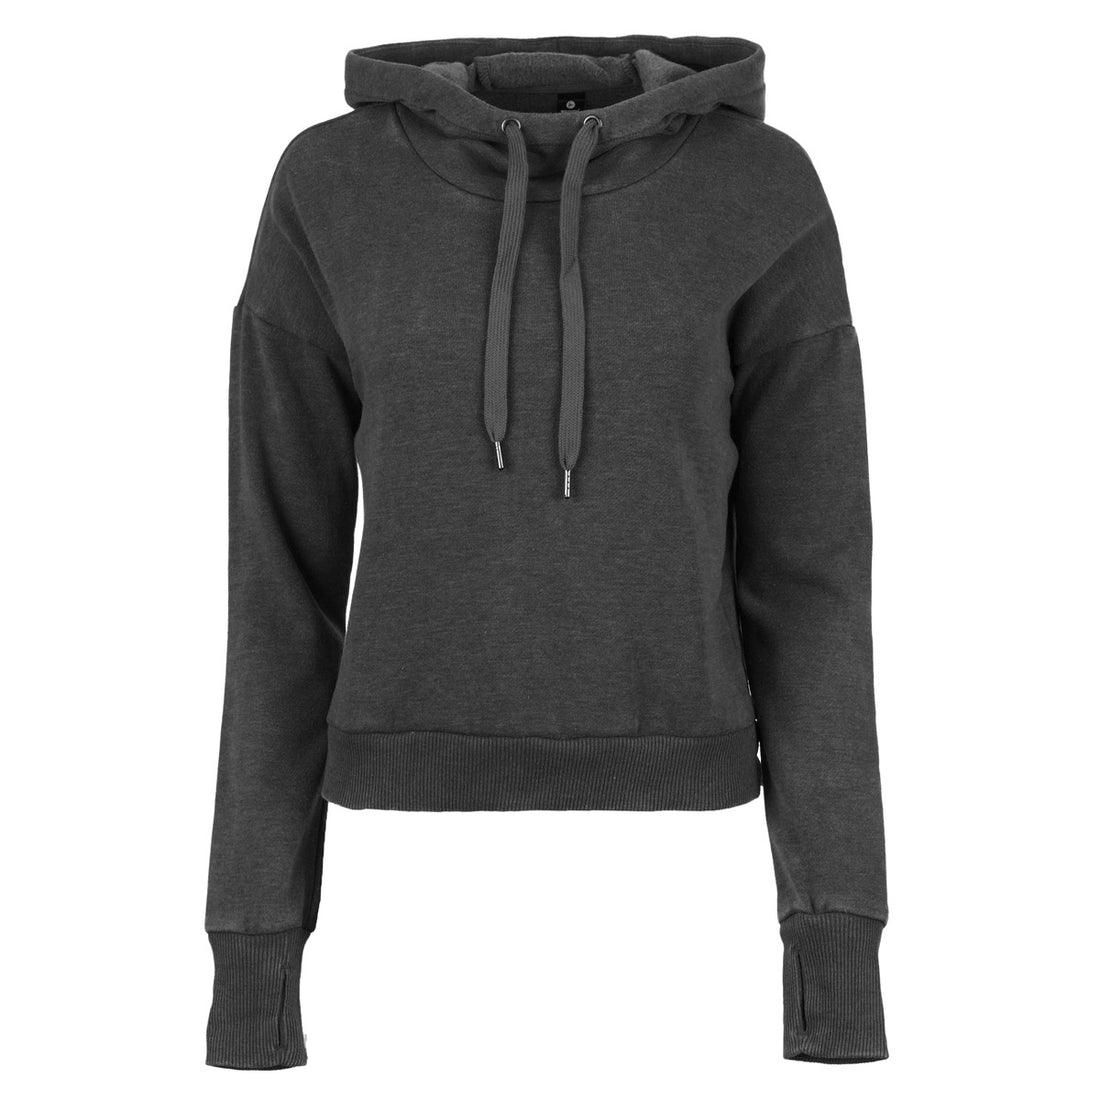 90 Degree By Reflex Women's Stone Washed Hoodie Sweatshirt (3 Colors) only  $11.99